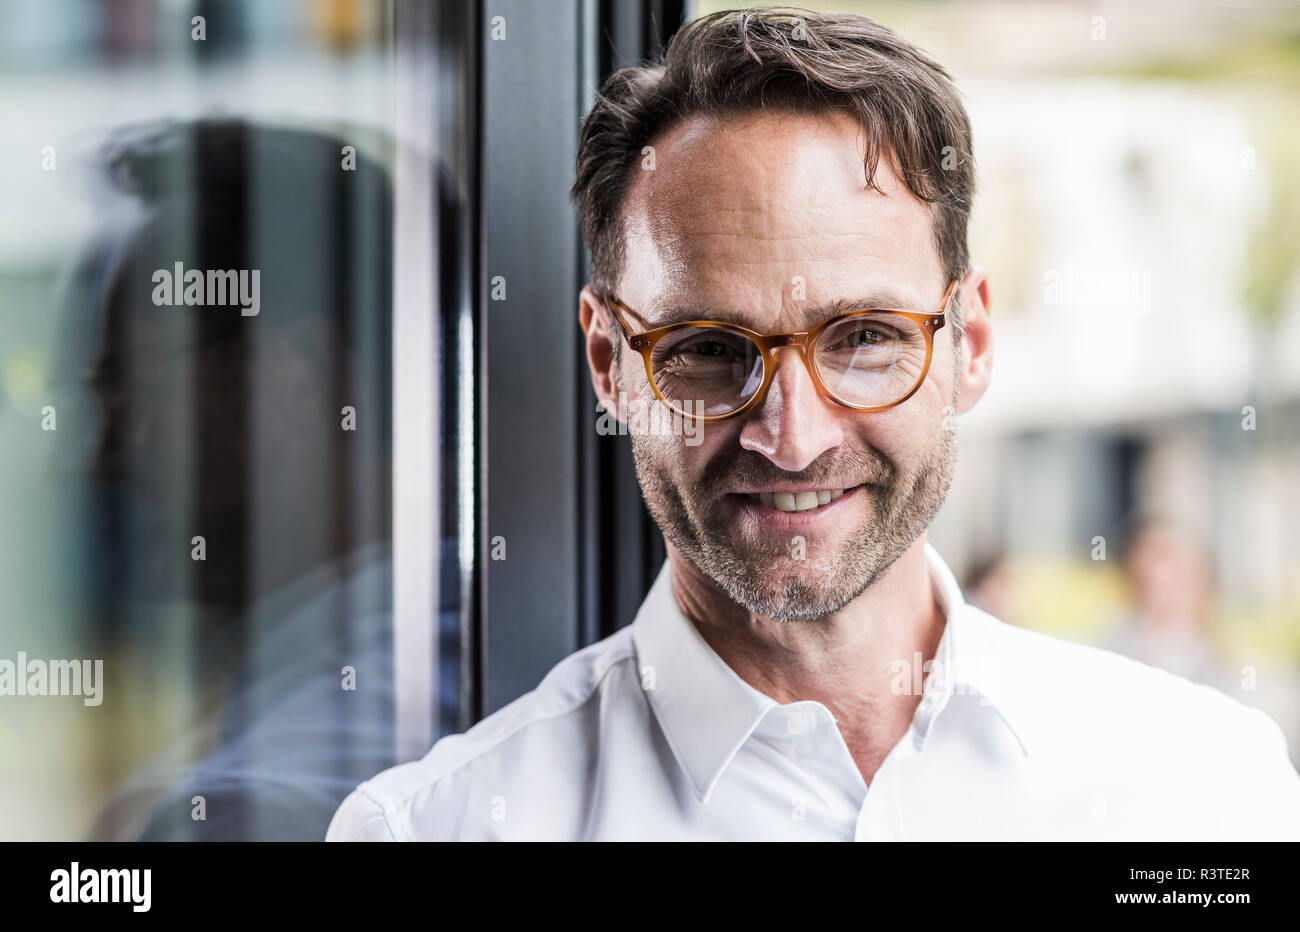 Portrait of smiling businessman wearing glasses Stock Photo